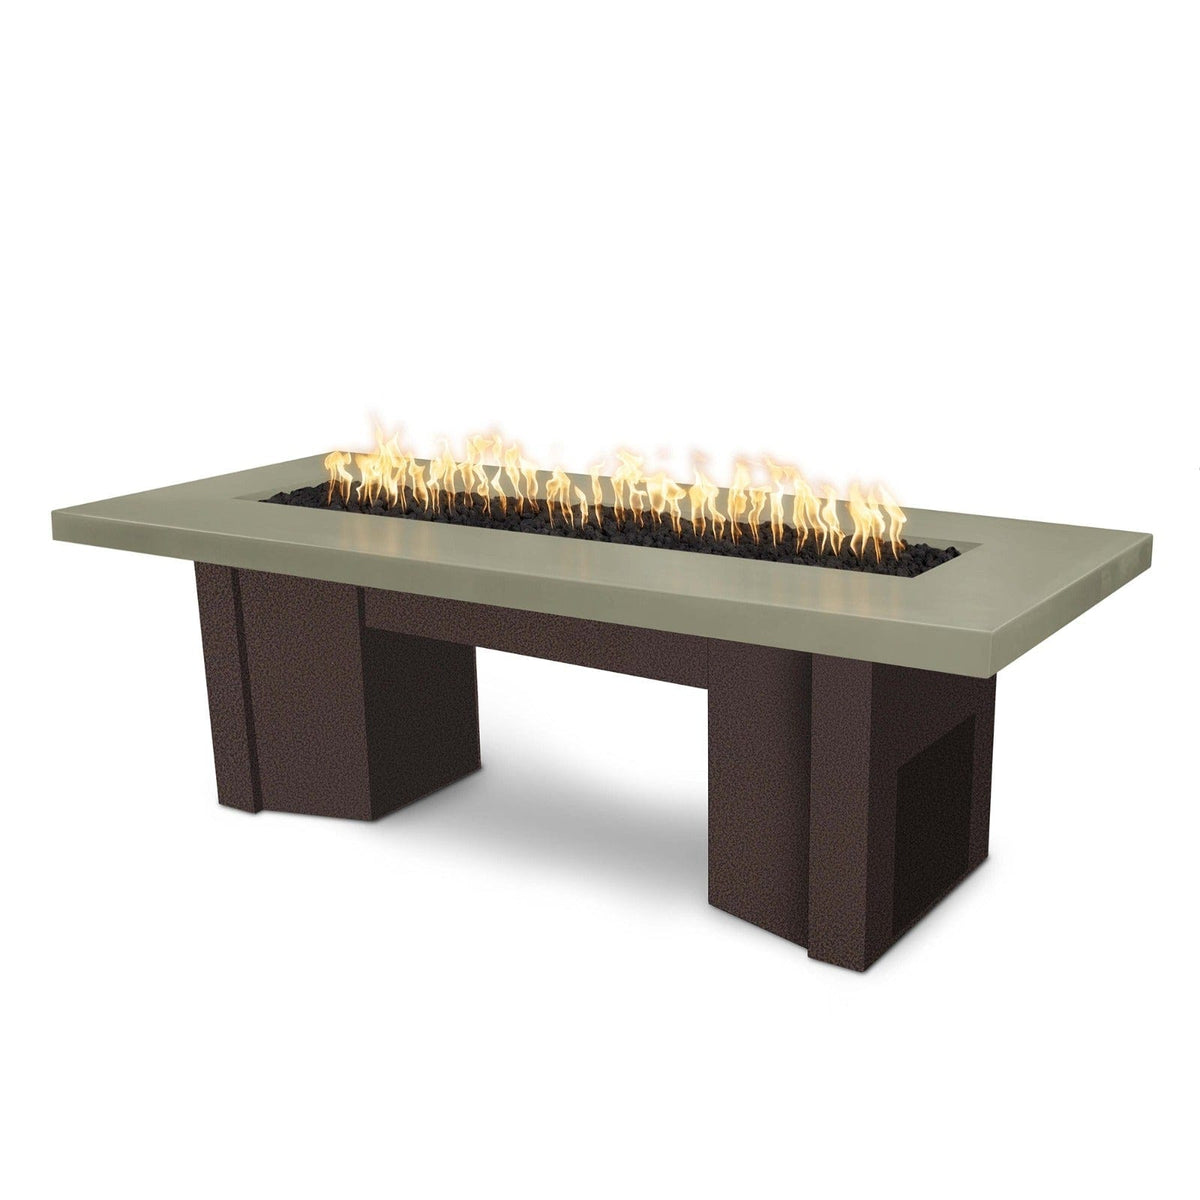 The Outdoor Plus Fire Features Ash (-ASH) / Copper Vein Powder Coated Steel (-CPV) The Outdoor Plus 78&quot; Alameda Fire Table Smooth Concrete in Liquid Propane - Match Lit with Flame Sense System / OPT-ALMGFRC78FSML-LP